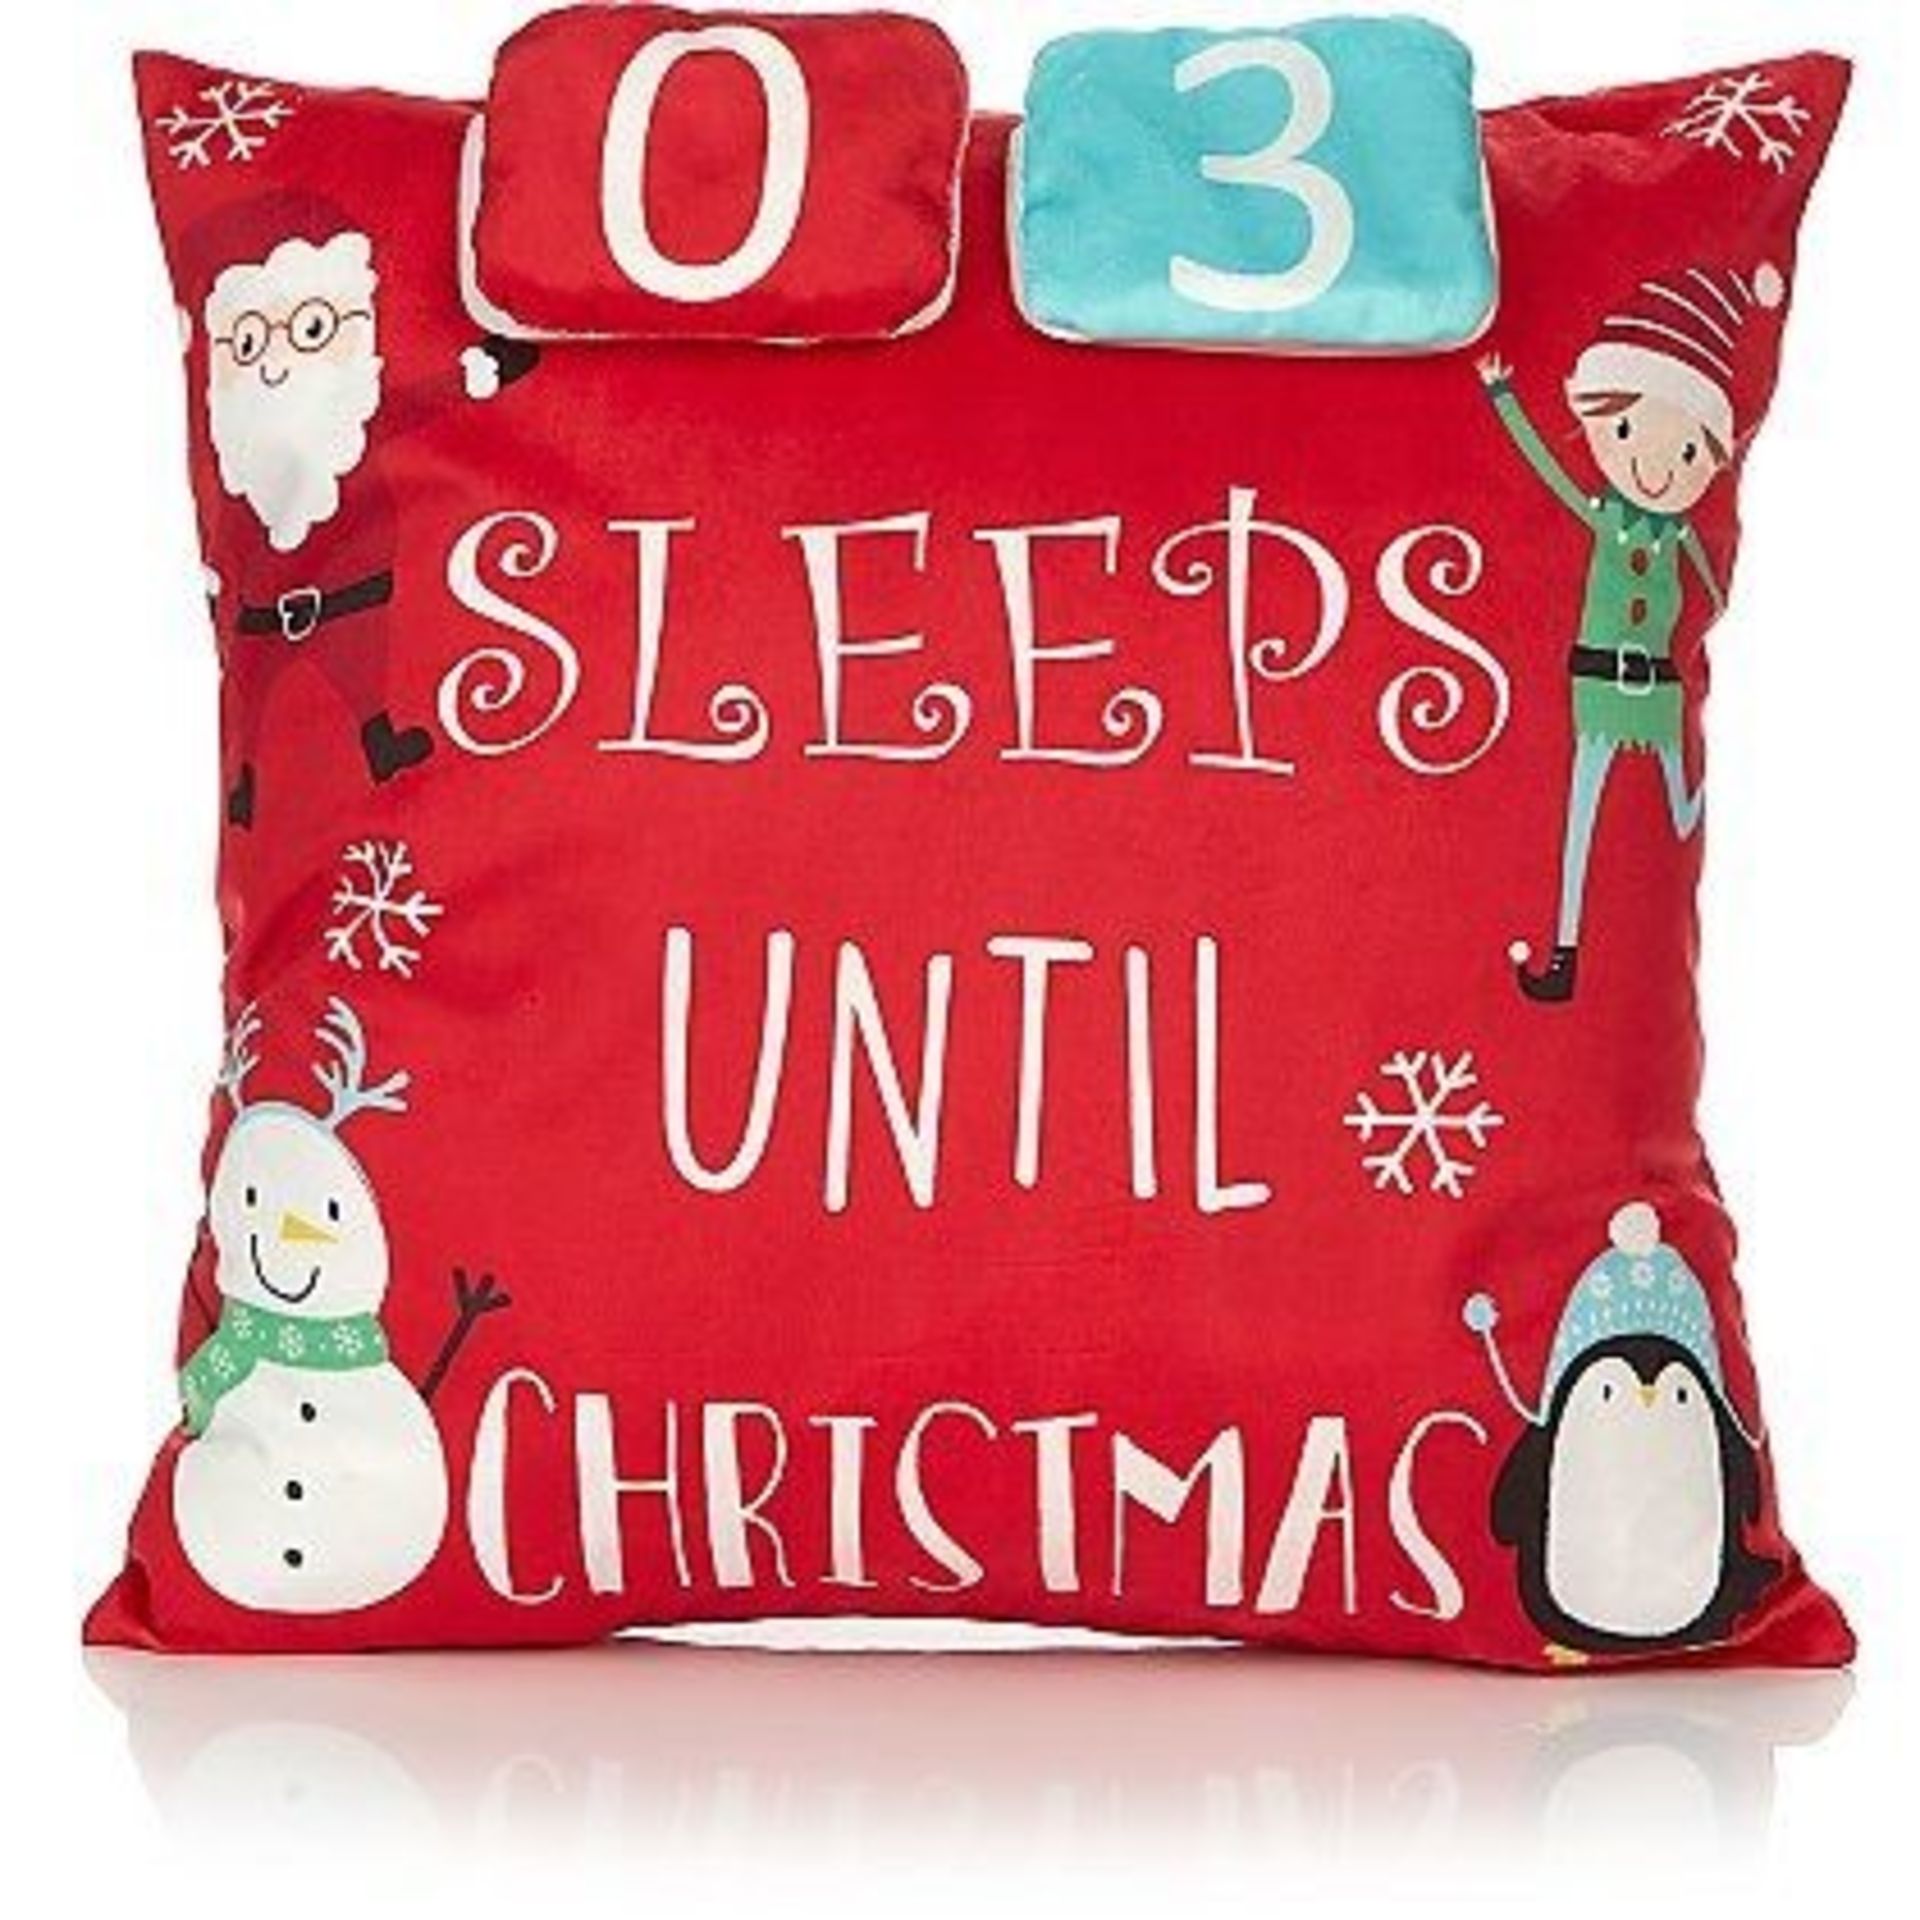 1 LOT TO CONTAIN 6 BOXES OF COUNTDOWN TO CHRISTMAS CUSHIONS, EACH BOX CONTAINS 12 CUSHIONS TOTALLING